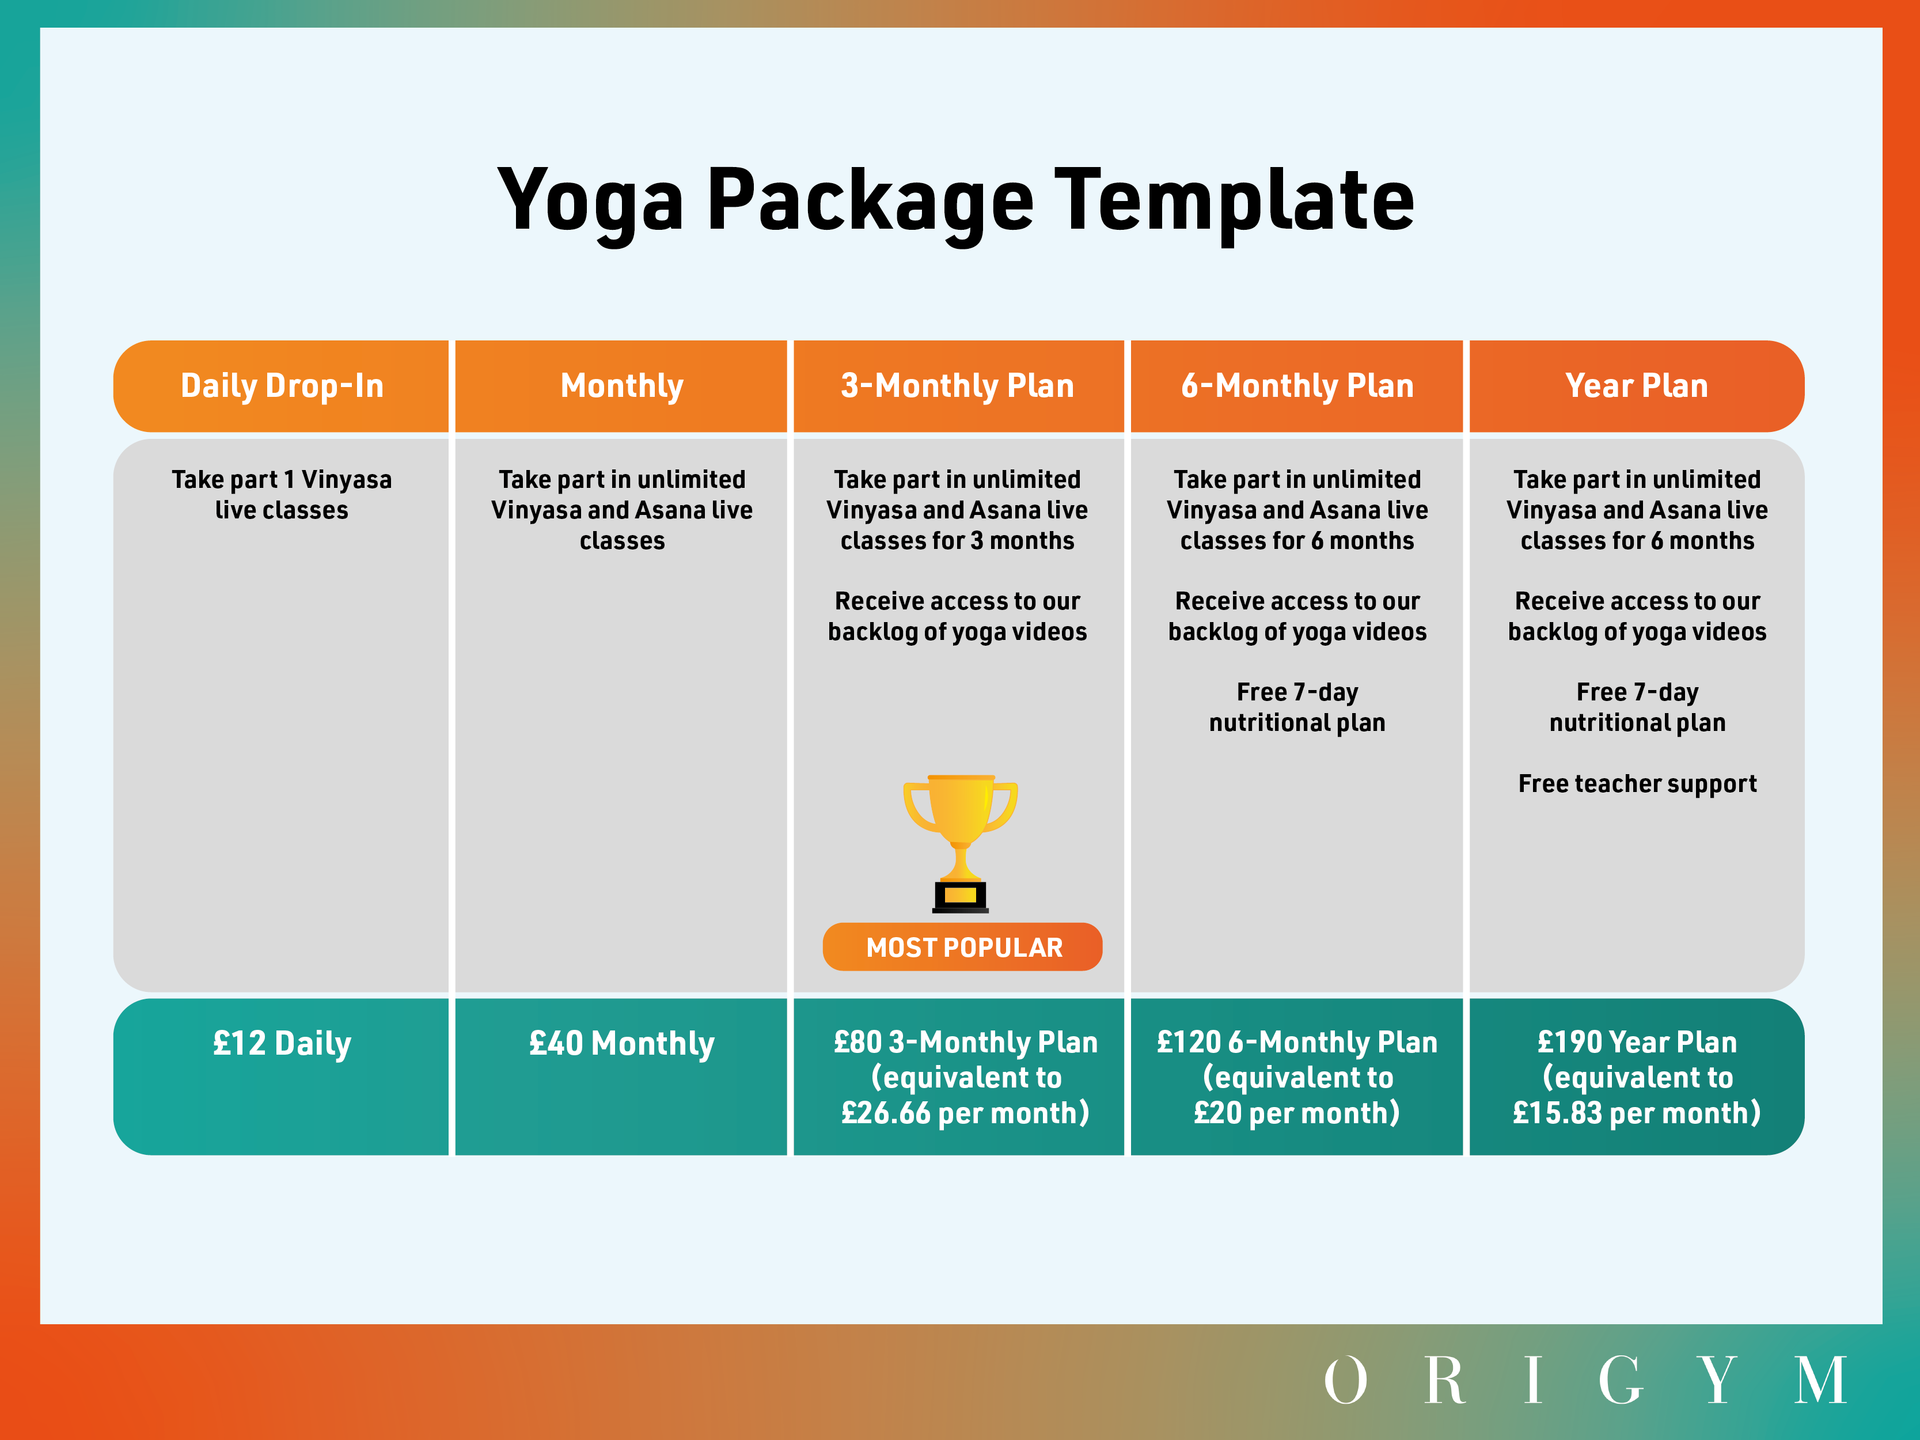 How Much Are Yoga Classes? A Teacher's Guide to Pricing